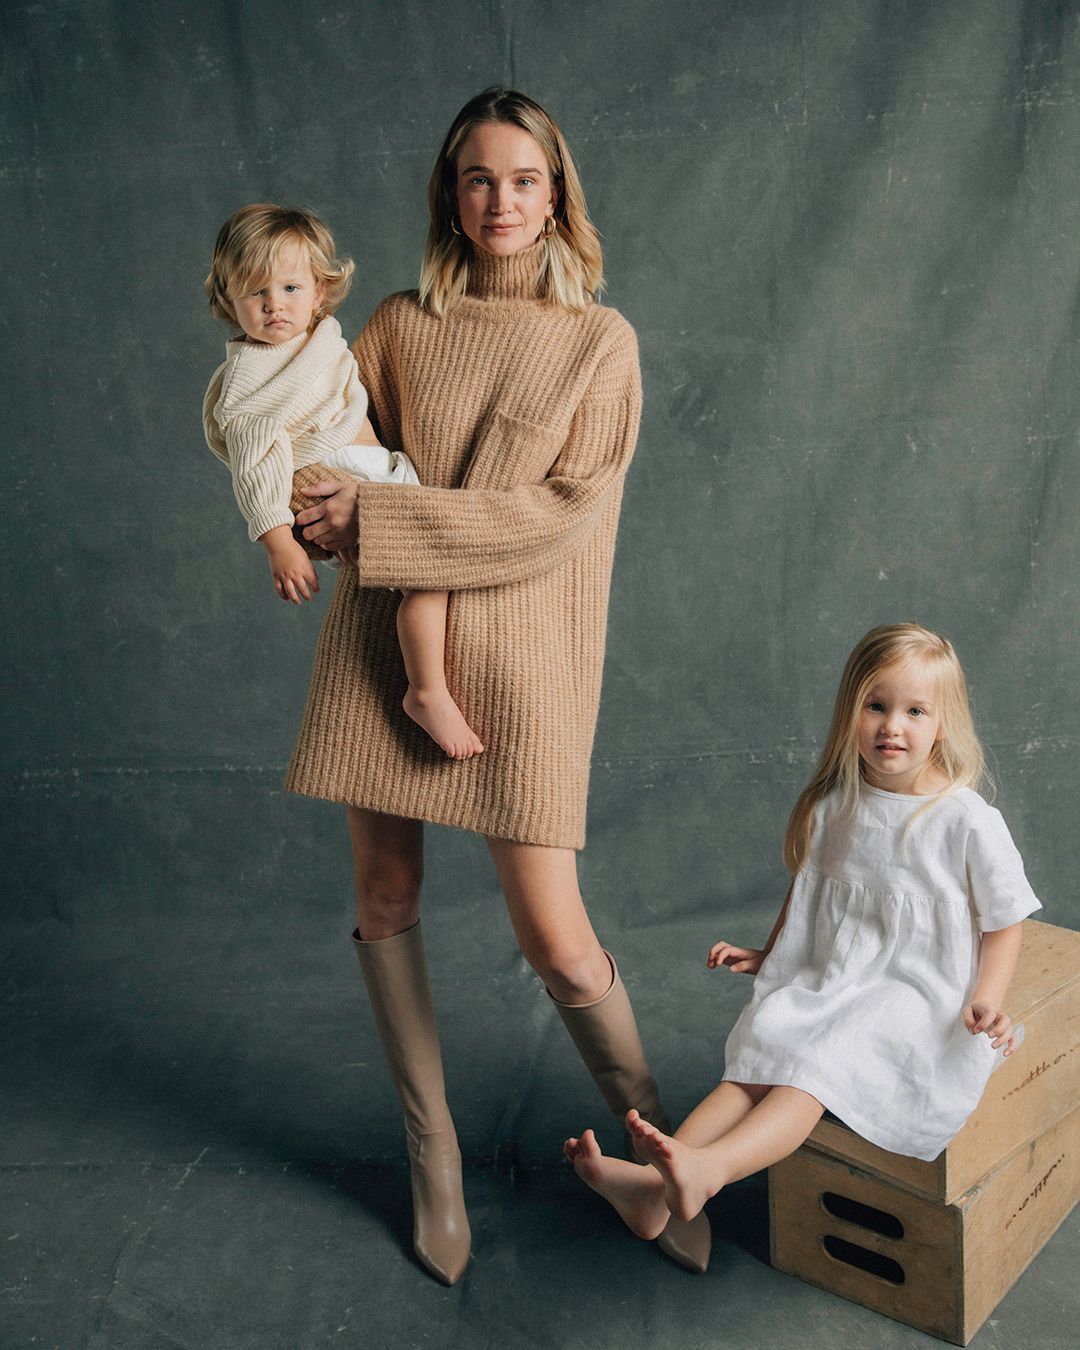 Rosie Tupper standing holding her son wearing a beige knit dress with her daughter sitting